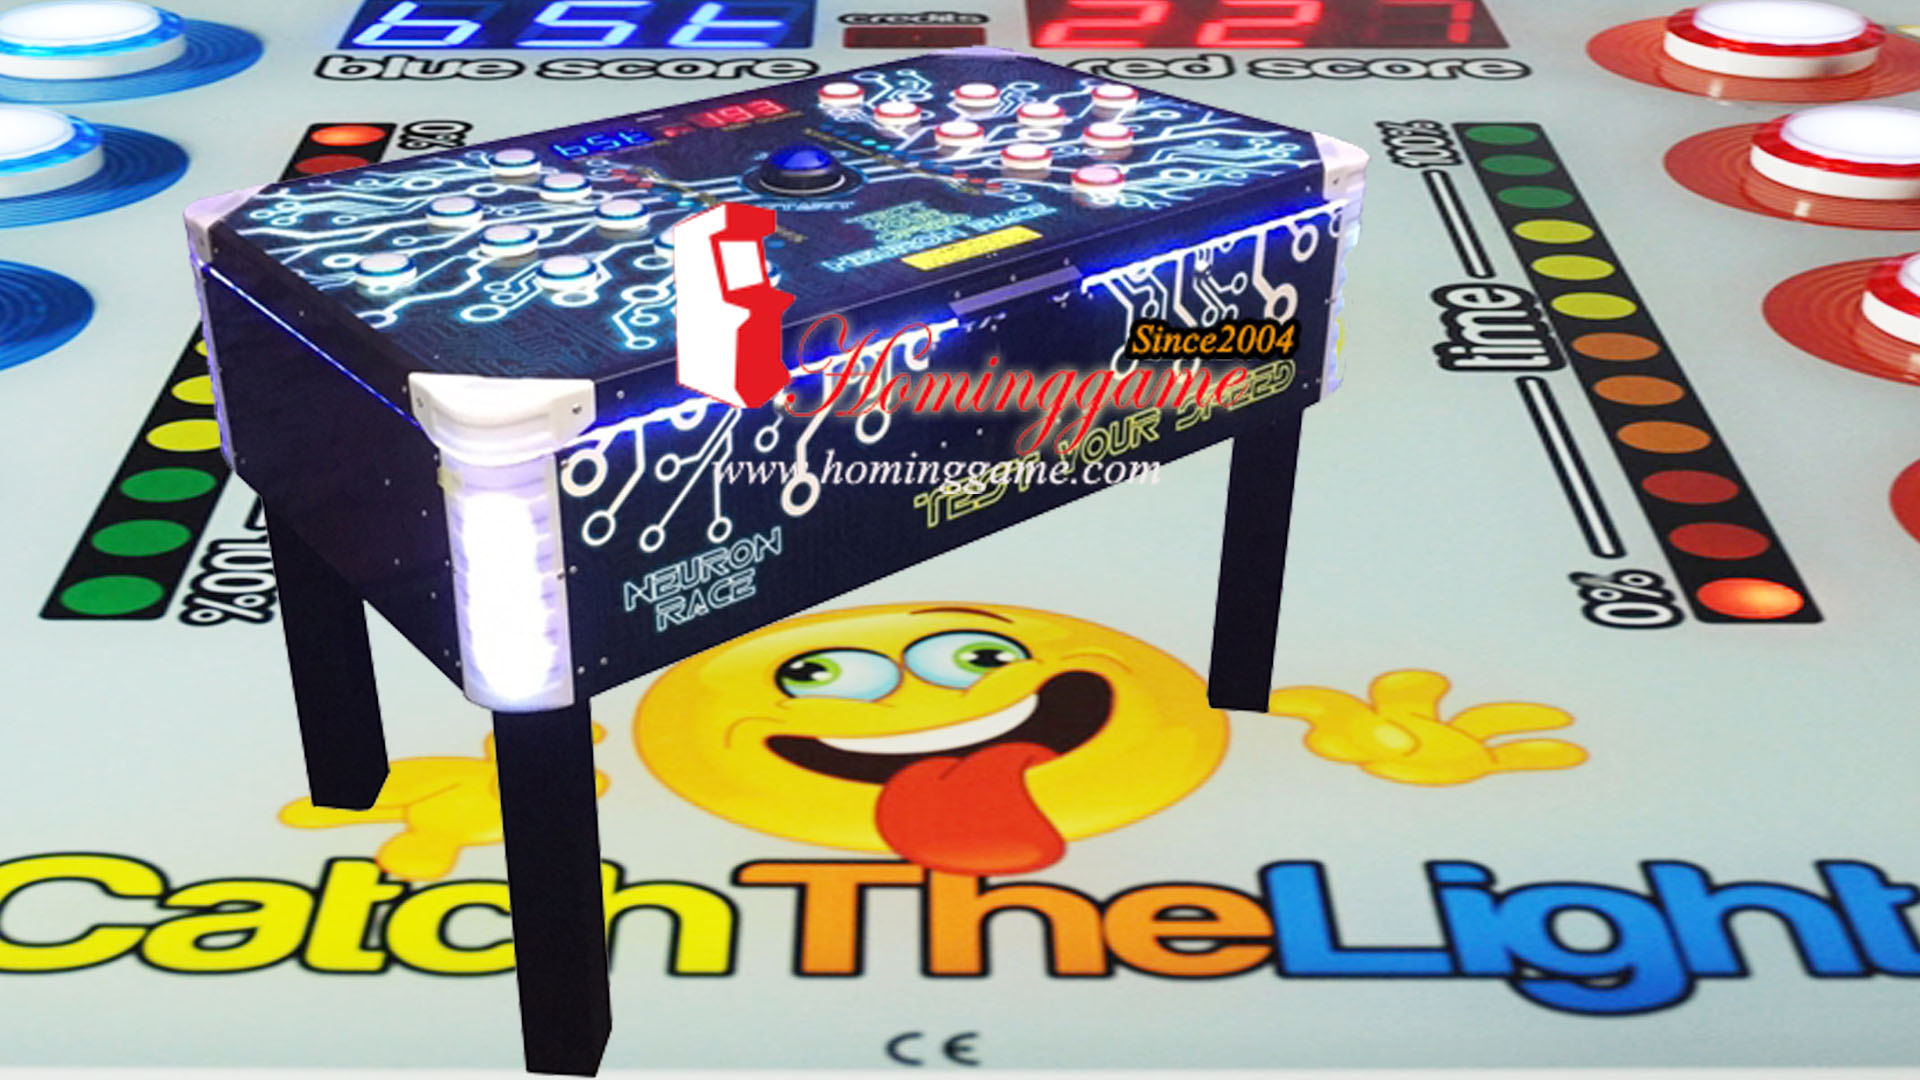 2018 HomingGame Kids Catch The Light Arcade Family Entertainment Game Machine,Catch The Light,Catch The Light Family Entertainment Game Machine,Entertainment Game Machine,Game Machine,Arcade Game Machine,Coin Operated Game Machine,Kids Redemption Game Machine,Amusement Park Game Equipment,Game Equipment,Indoor Game Machine,Slot Game Machine,Electrical slot Game Machine,Kids Machine